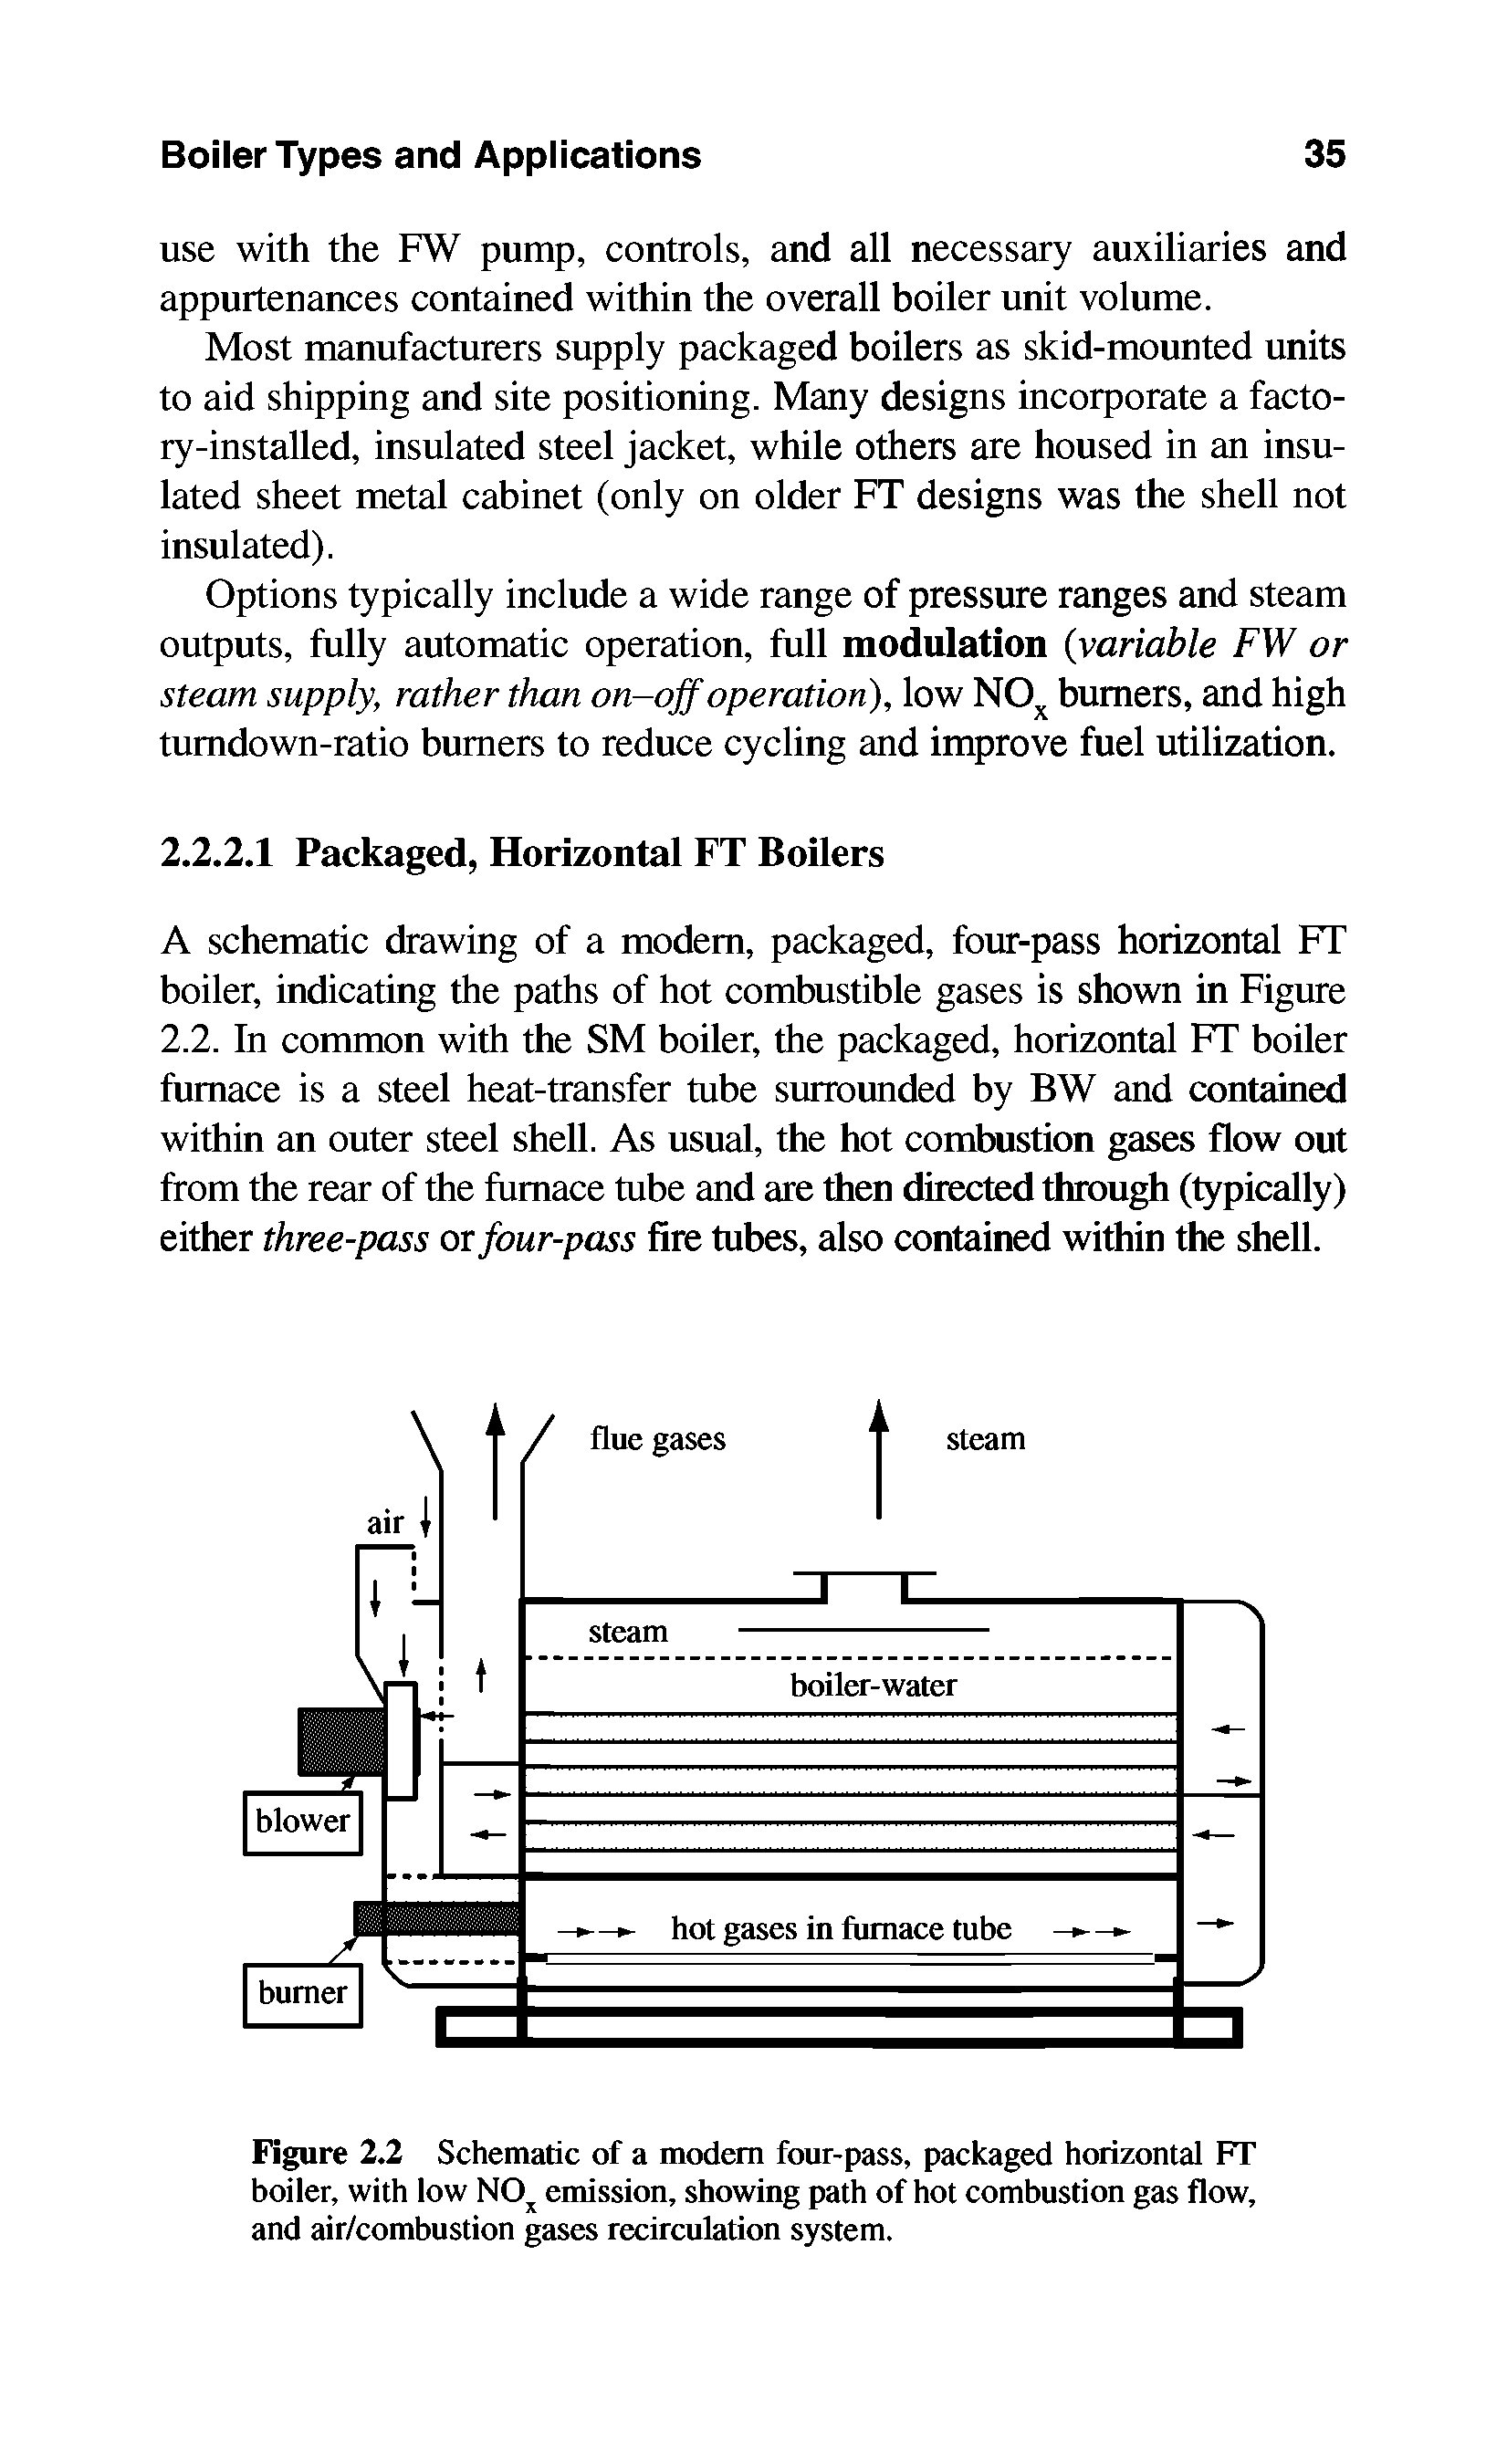 Figure 2.2 Schematic of a modem four-pass, packaged horizontal FT boiler, with low NOx emission, showing path of hot combustion gas flow, and air/combustion gases recirculation system.